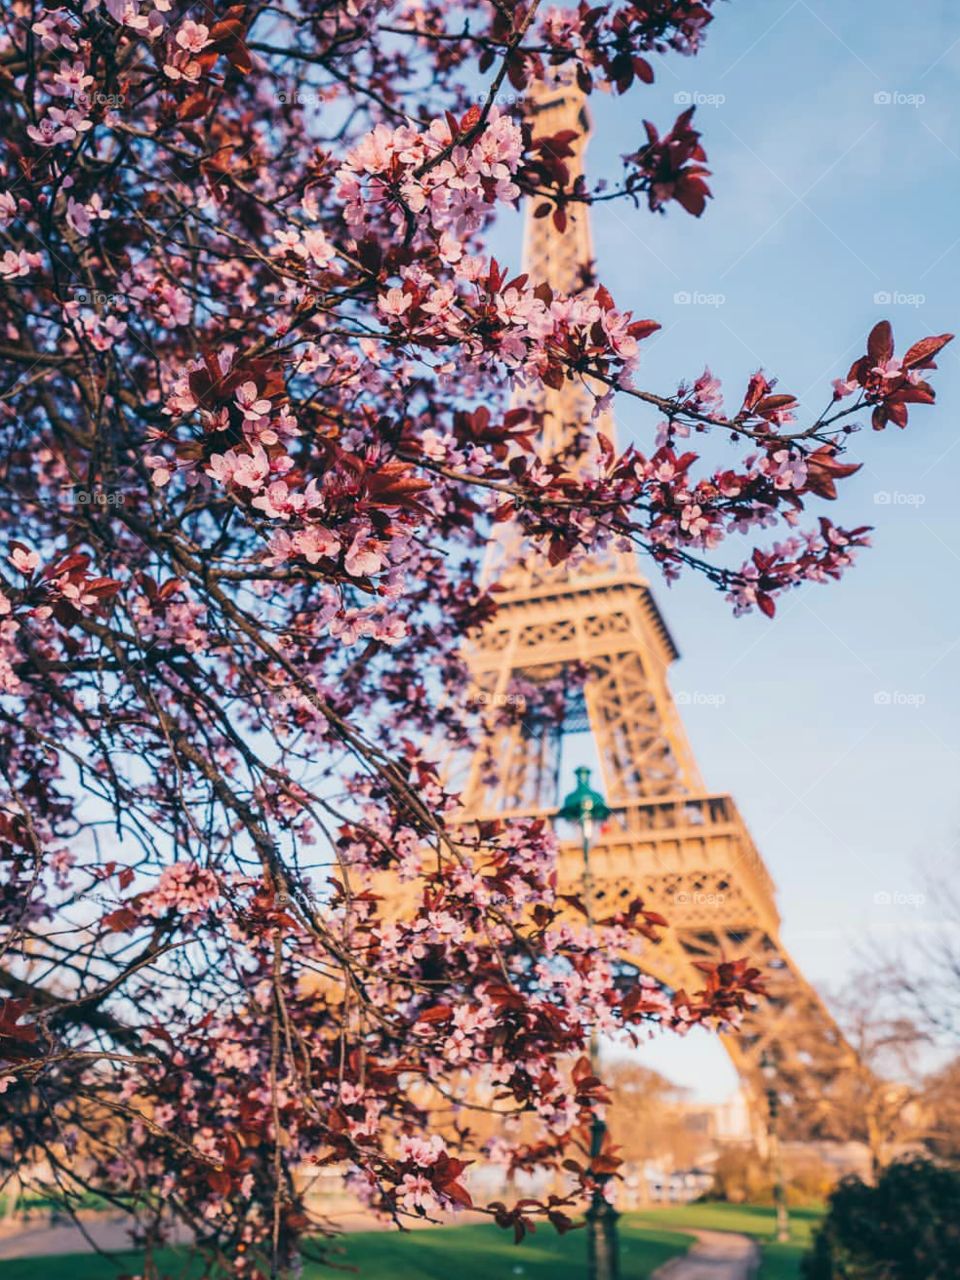 Spring in Paris! 🗼 🌸 Stop and take a look at the beautiful cherryblossom with a stunning view of Eiffel tower in Paris, France. 🇫🇷